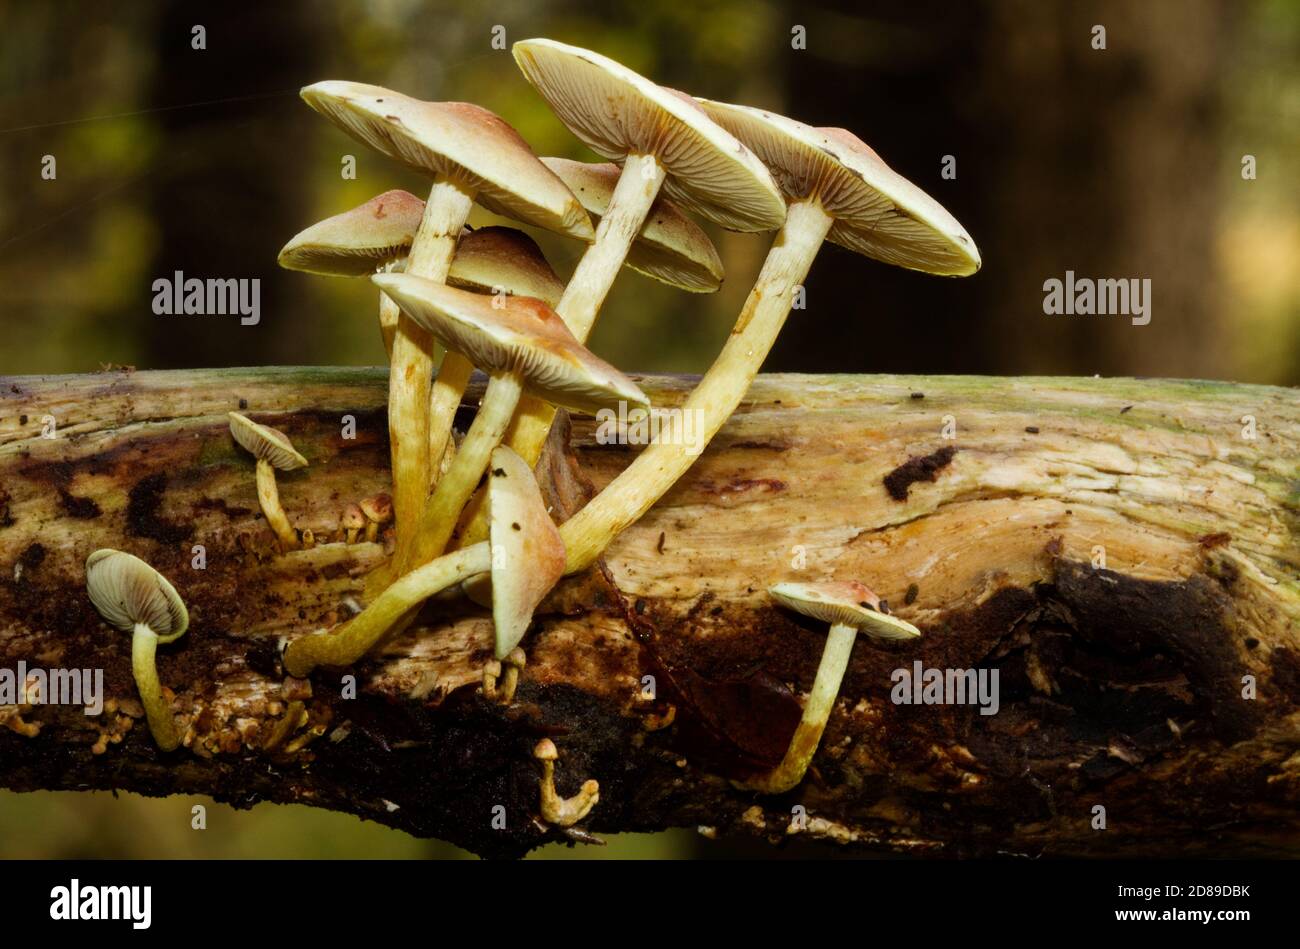 Clump of Sulphur Tuft mushrooms growing on the rotting branch of a tree Stock Photo